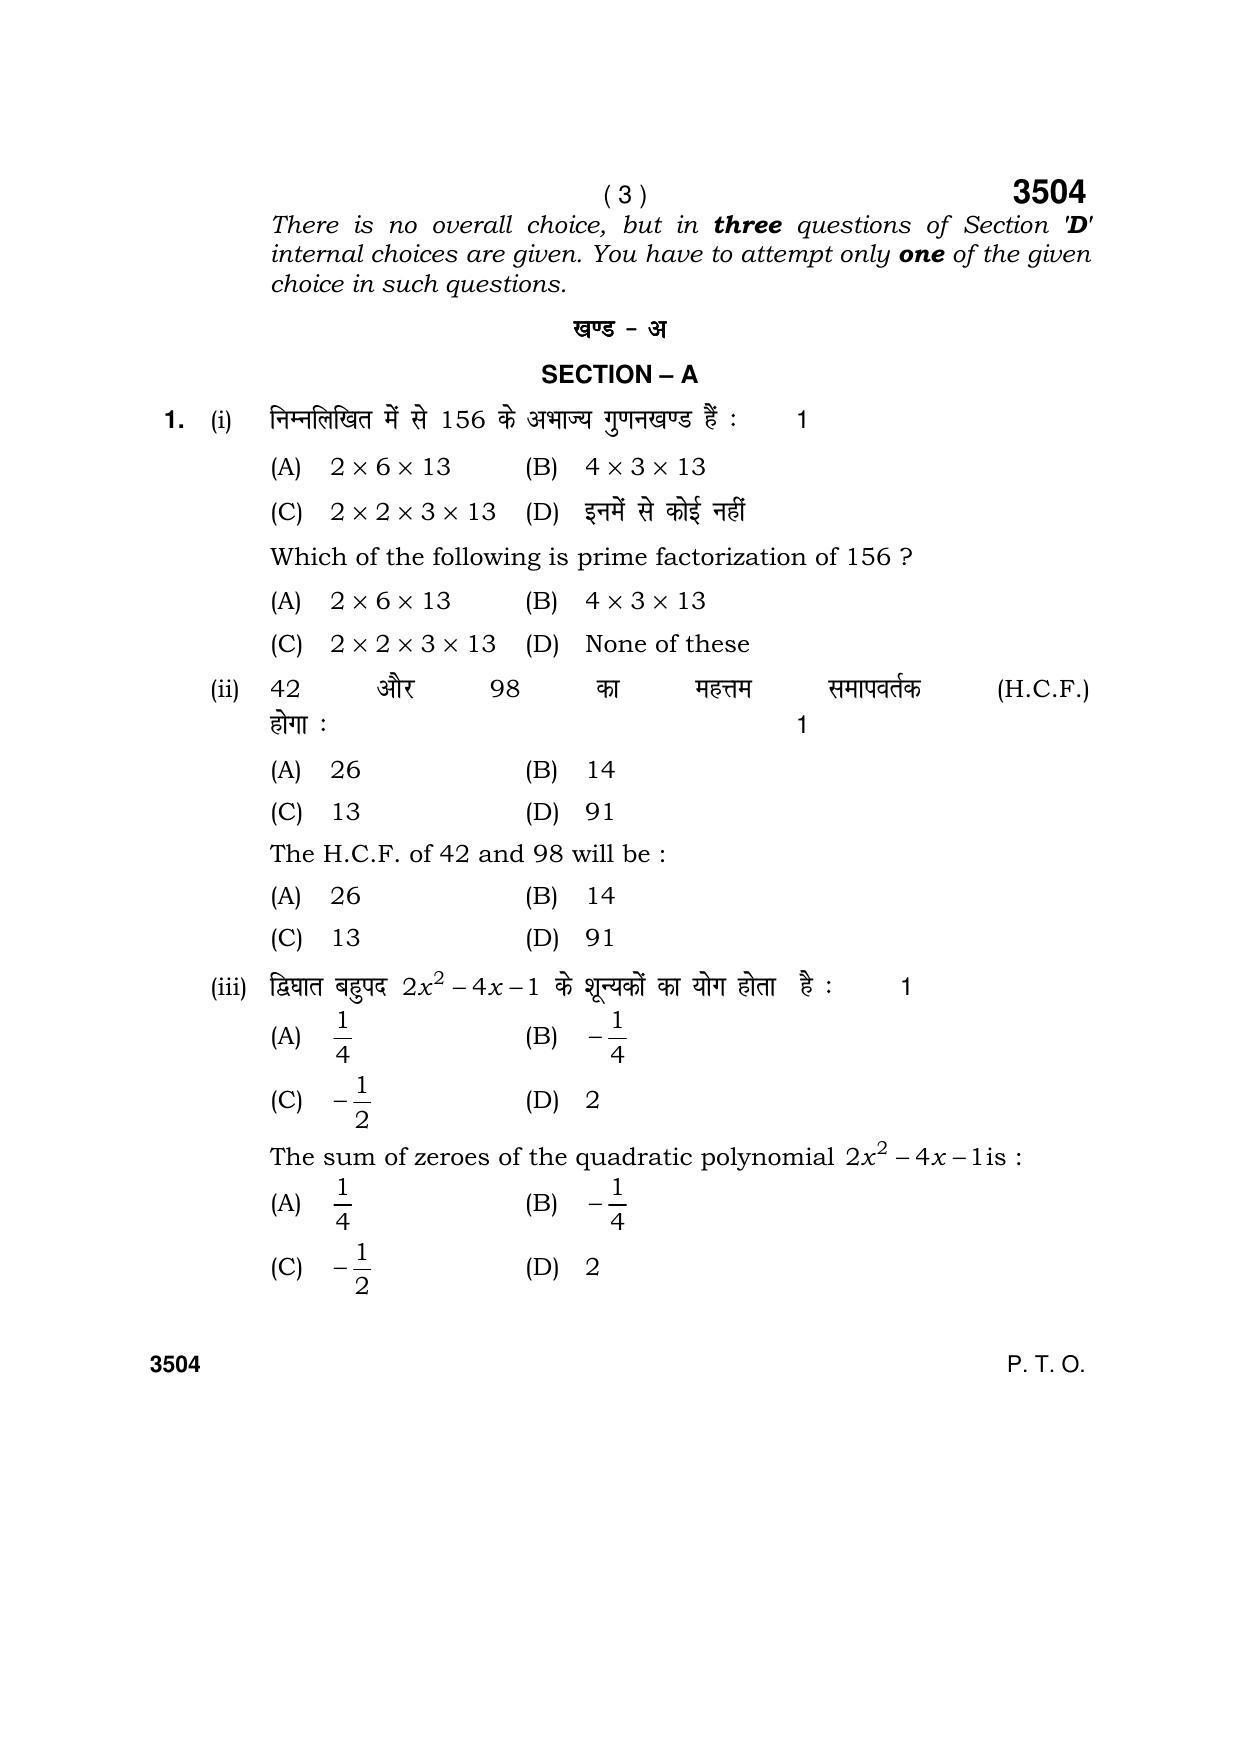 Haryana Board HBSE Class 10 Mathematics (Blind c) 2018 Question Paper - Page 3